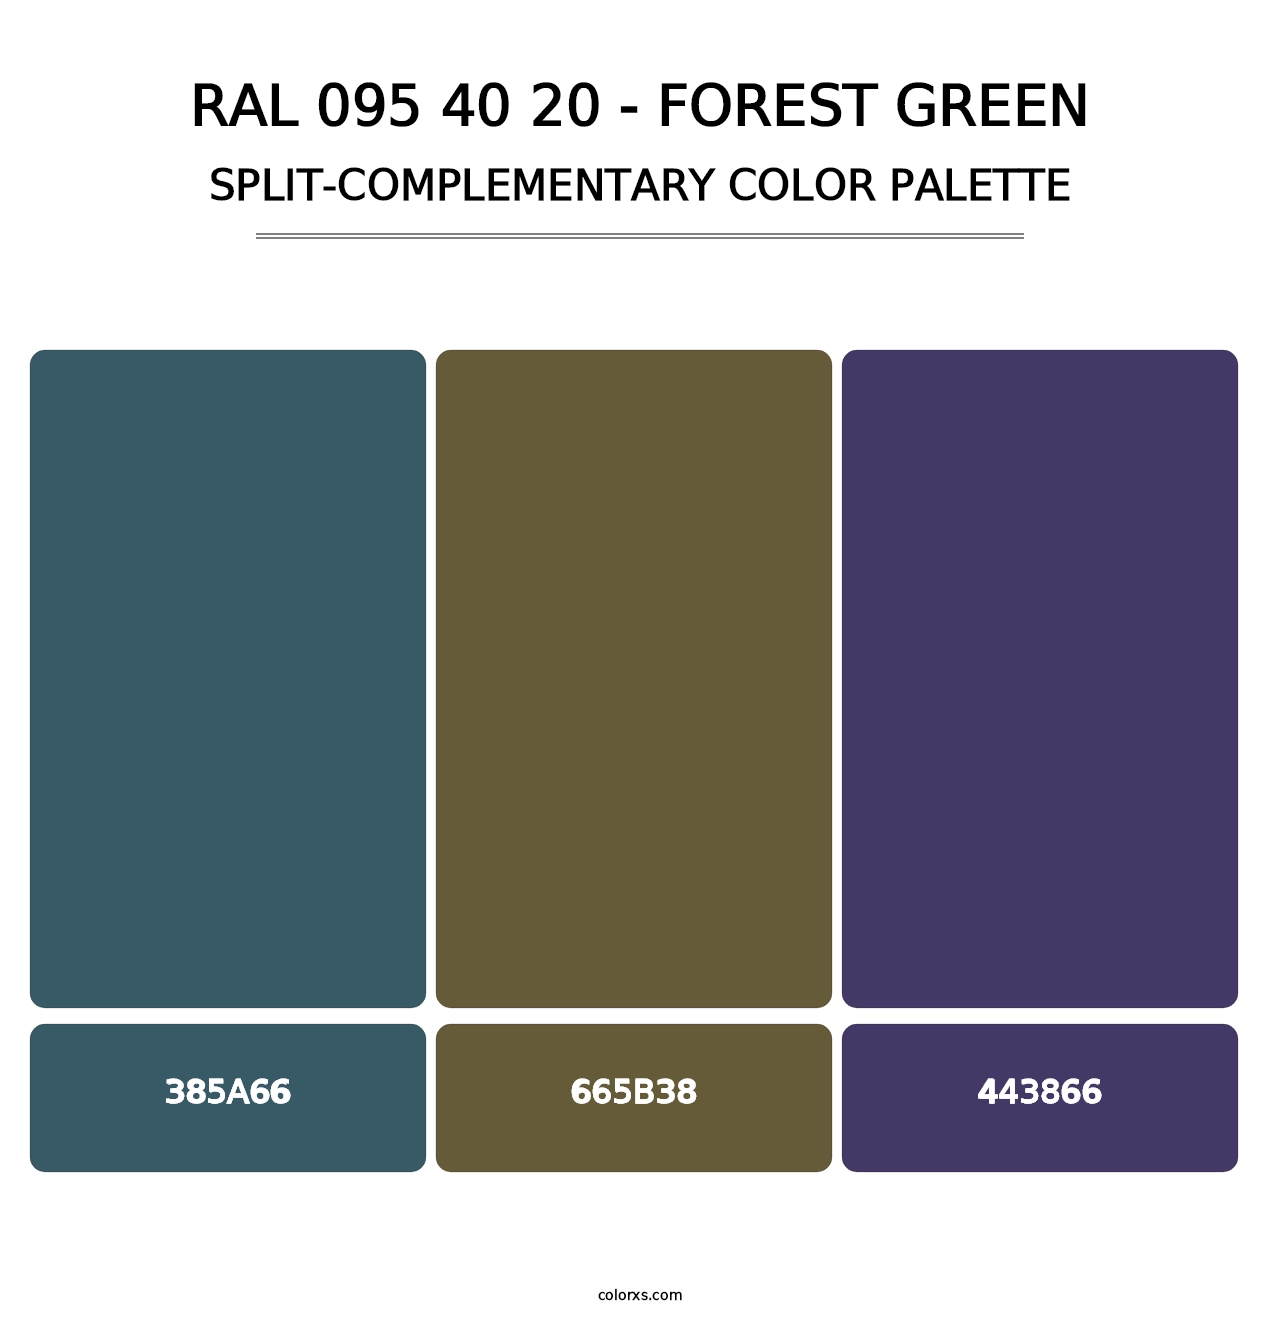 RAL 095 40 20 - Forest Green - Split-Complementary Color Palette